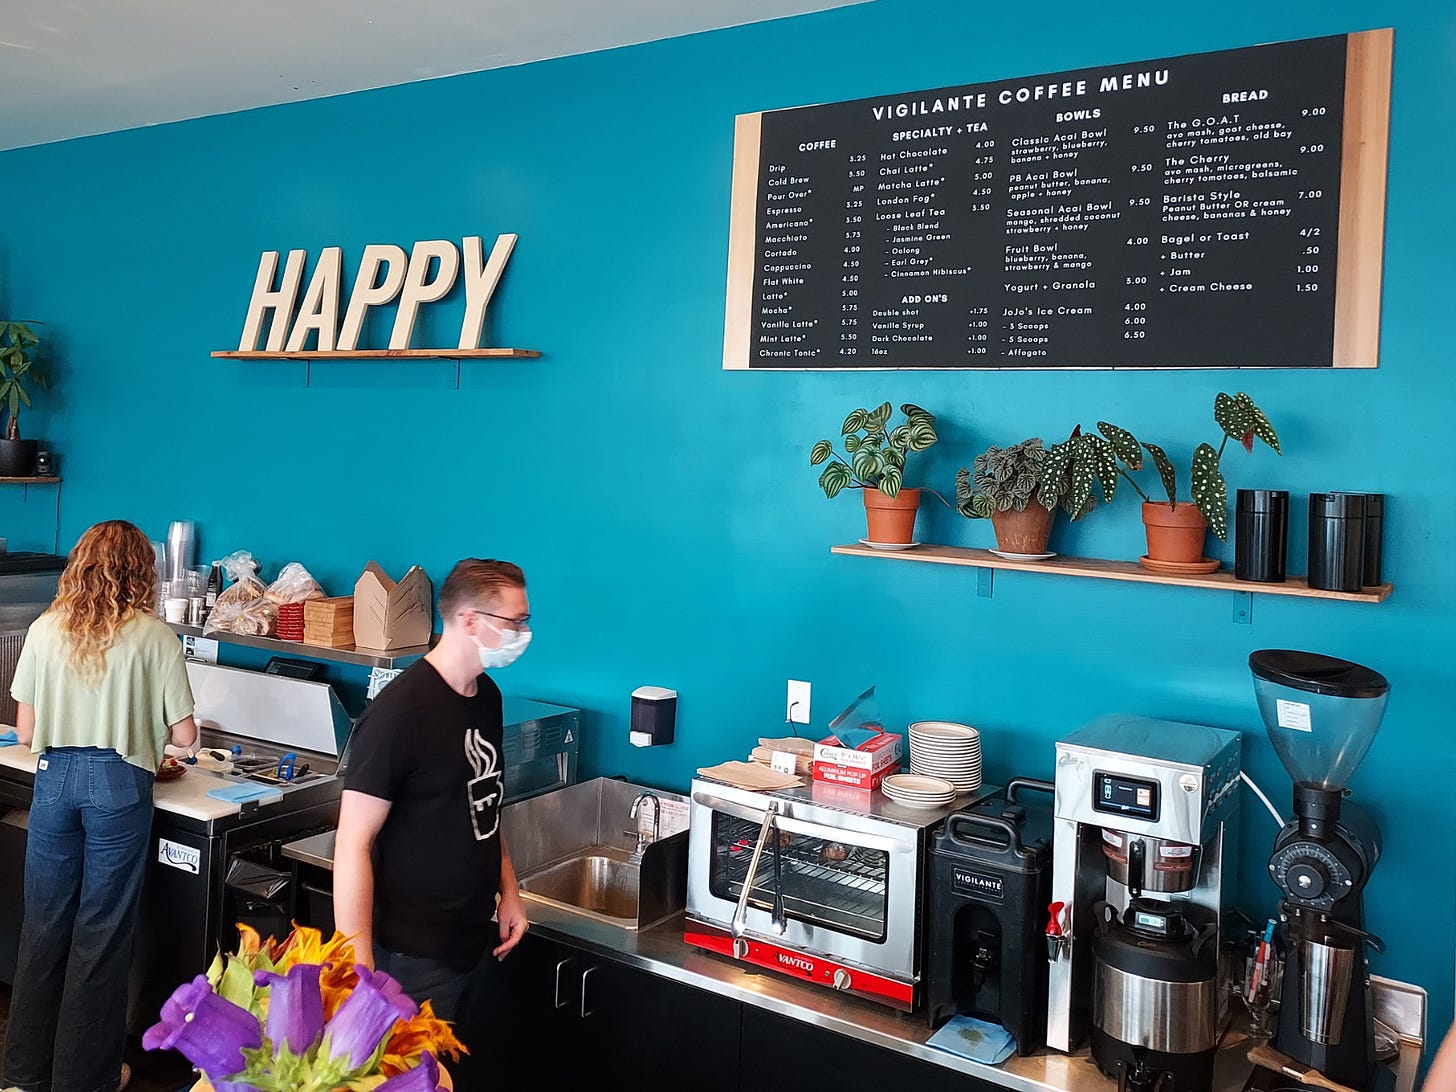 The word "HAPPY" in white, wood, block letters is propped up against a teal blue wall on a shelf next to a black coffee shop menu over the back bar of a cafe. Employees prep food with their back to the camera.